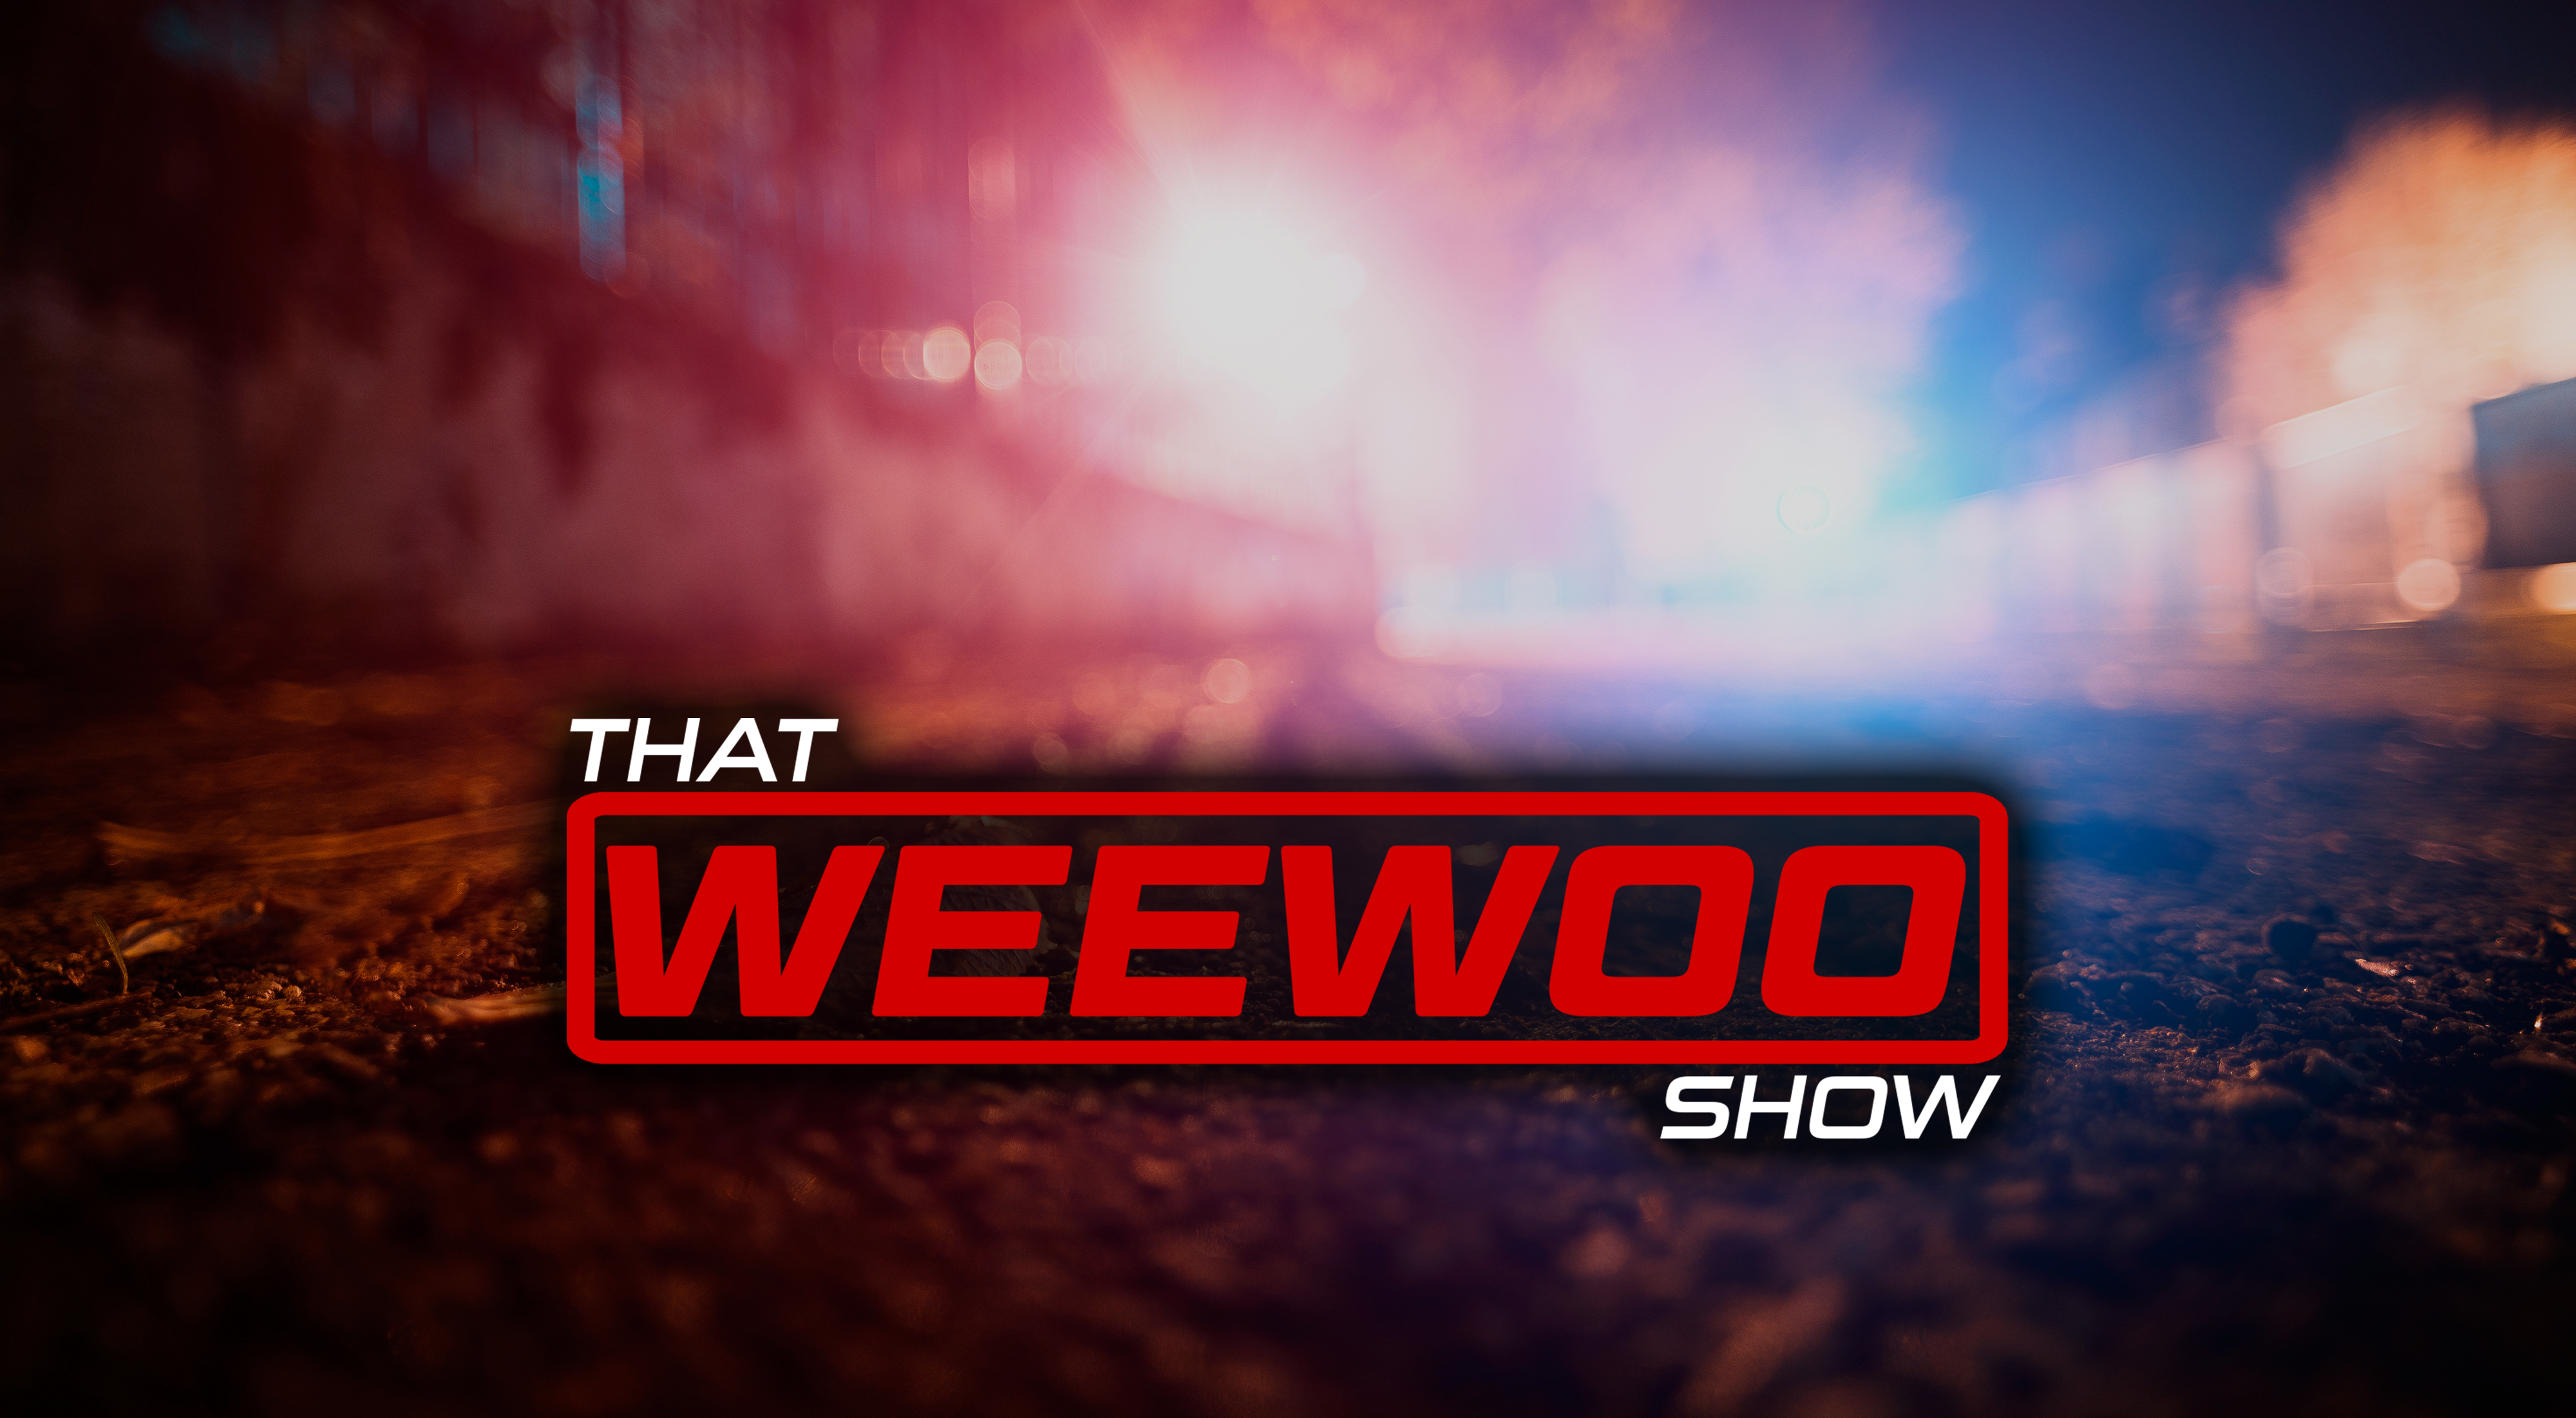 Banner image is a soft-focus nighttime street at road surface level, lit with blue and red lights. Superimposed text reads: That Weewoo Show